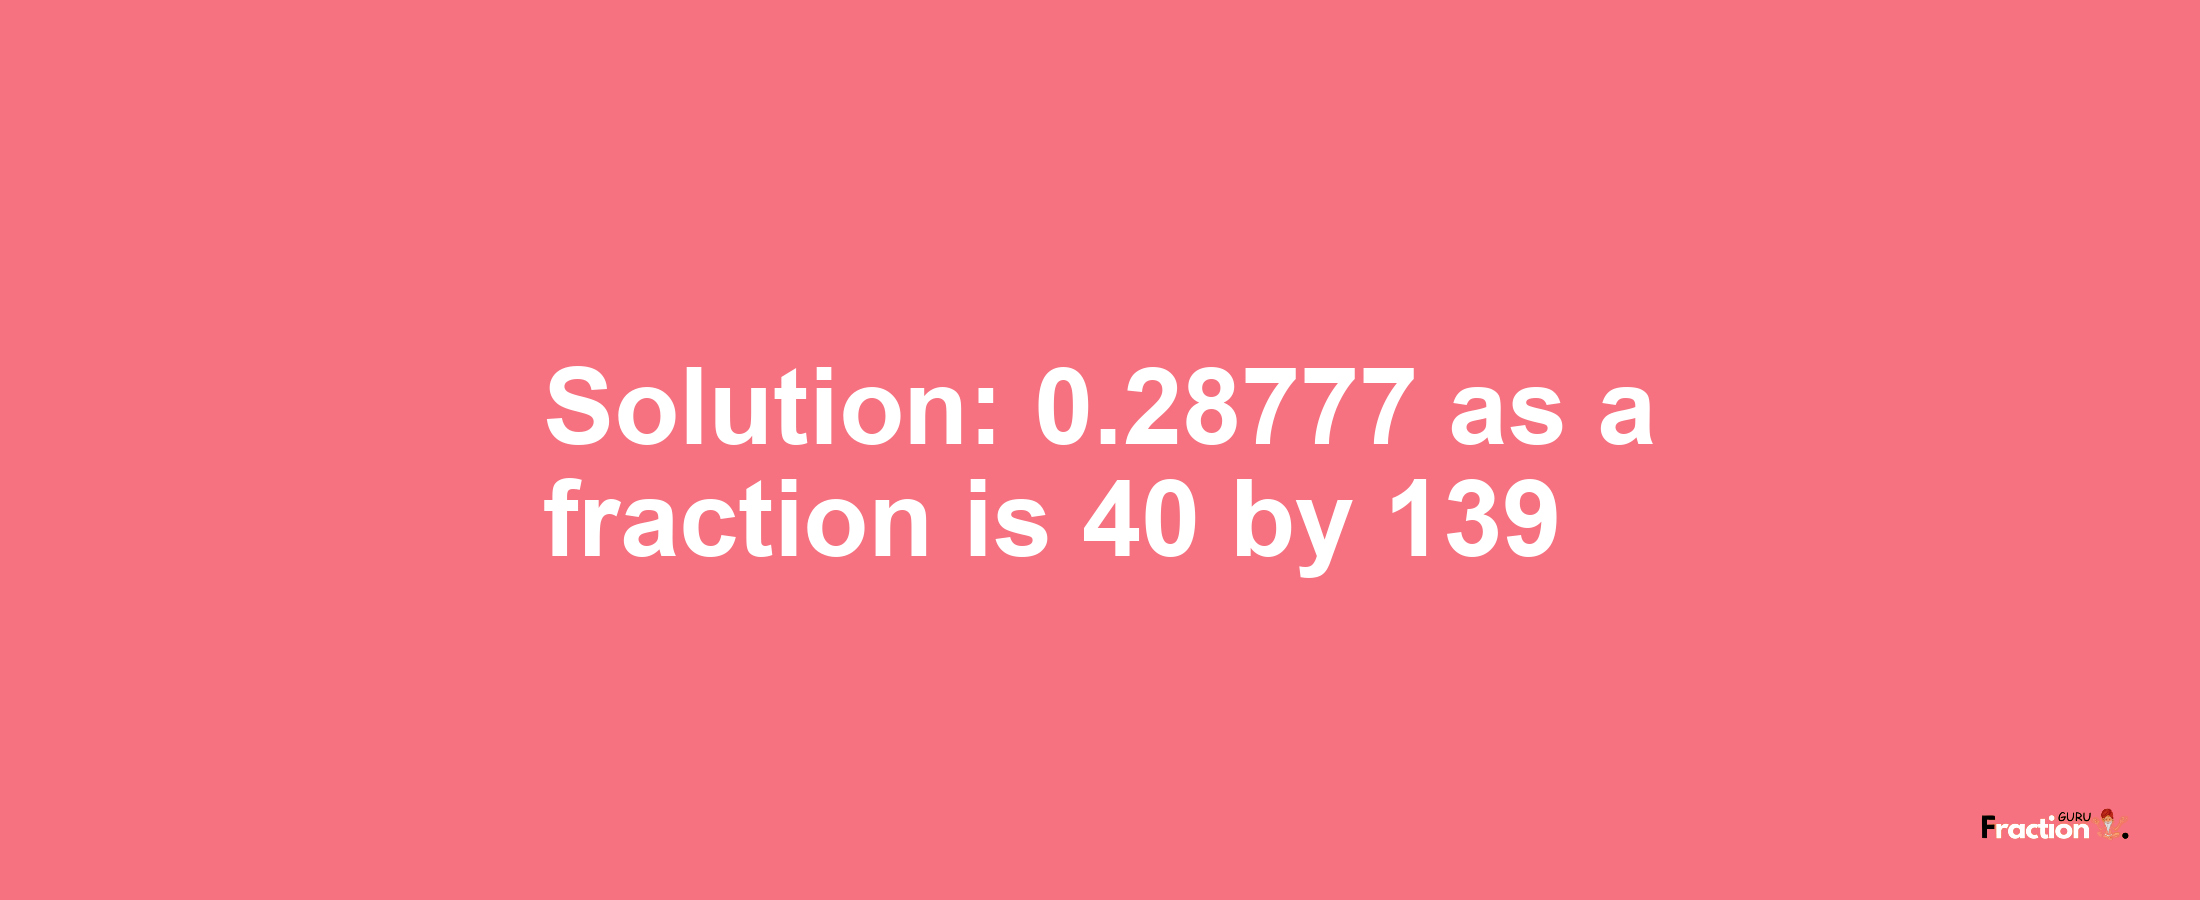 Solution:0.28777 as a fraction is 40/139